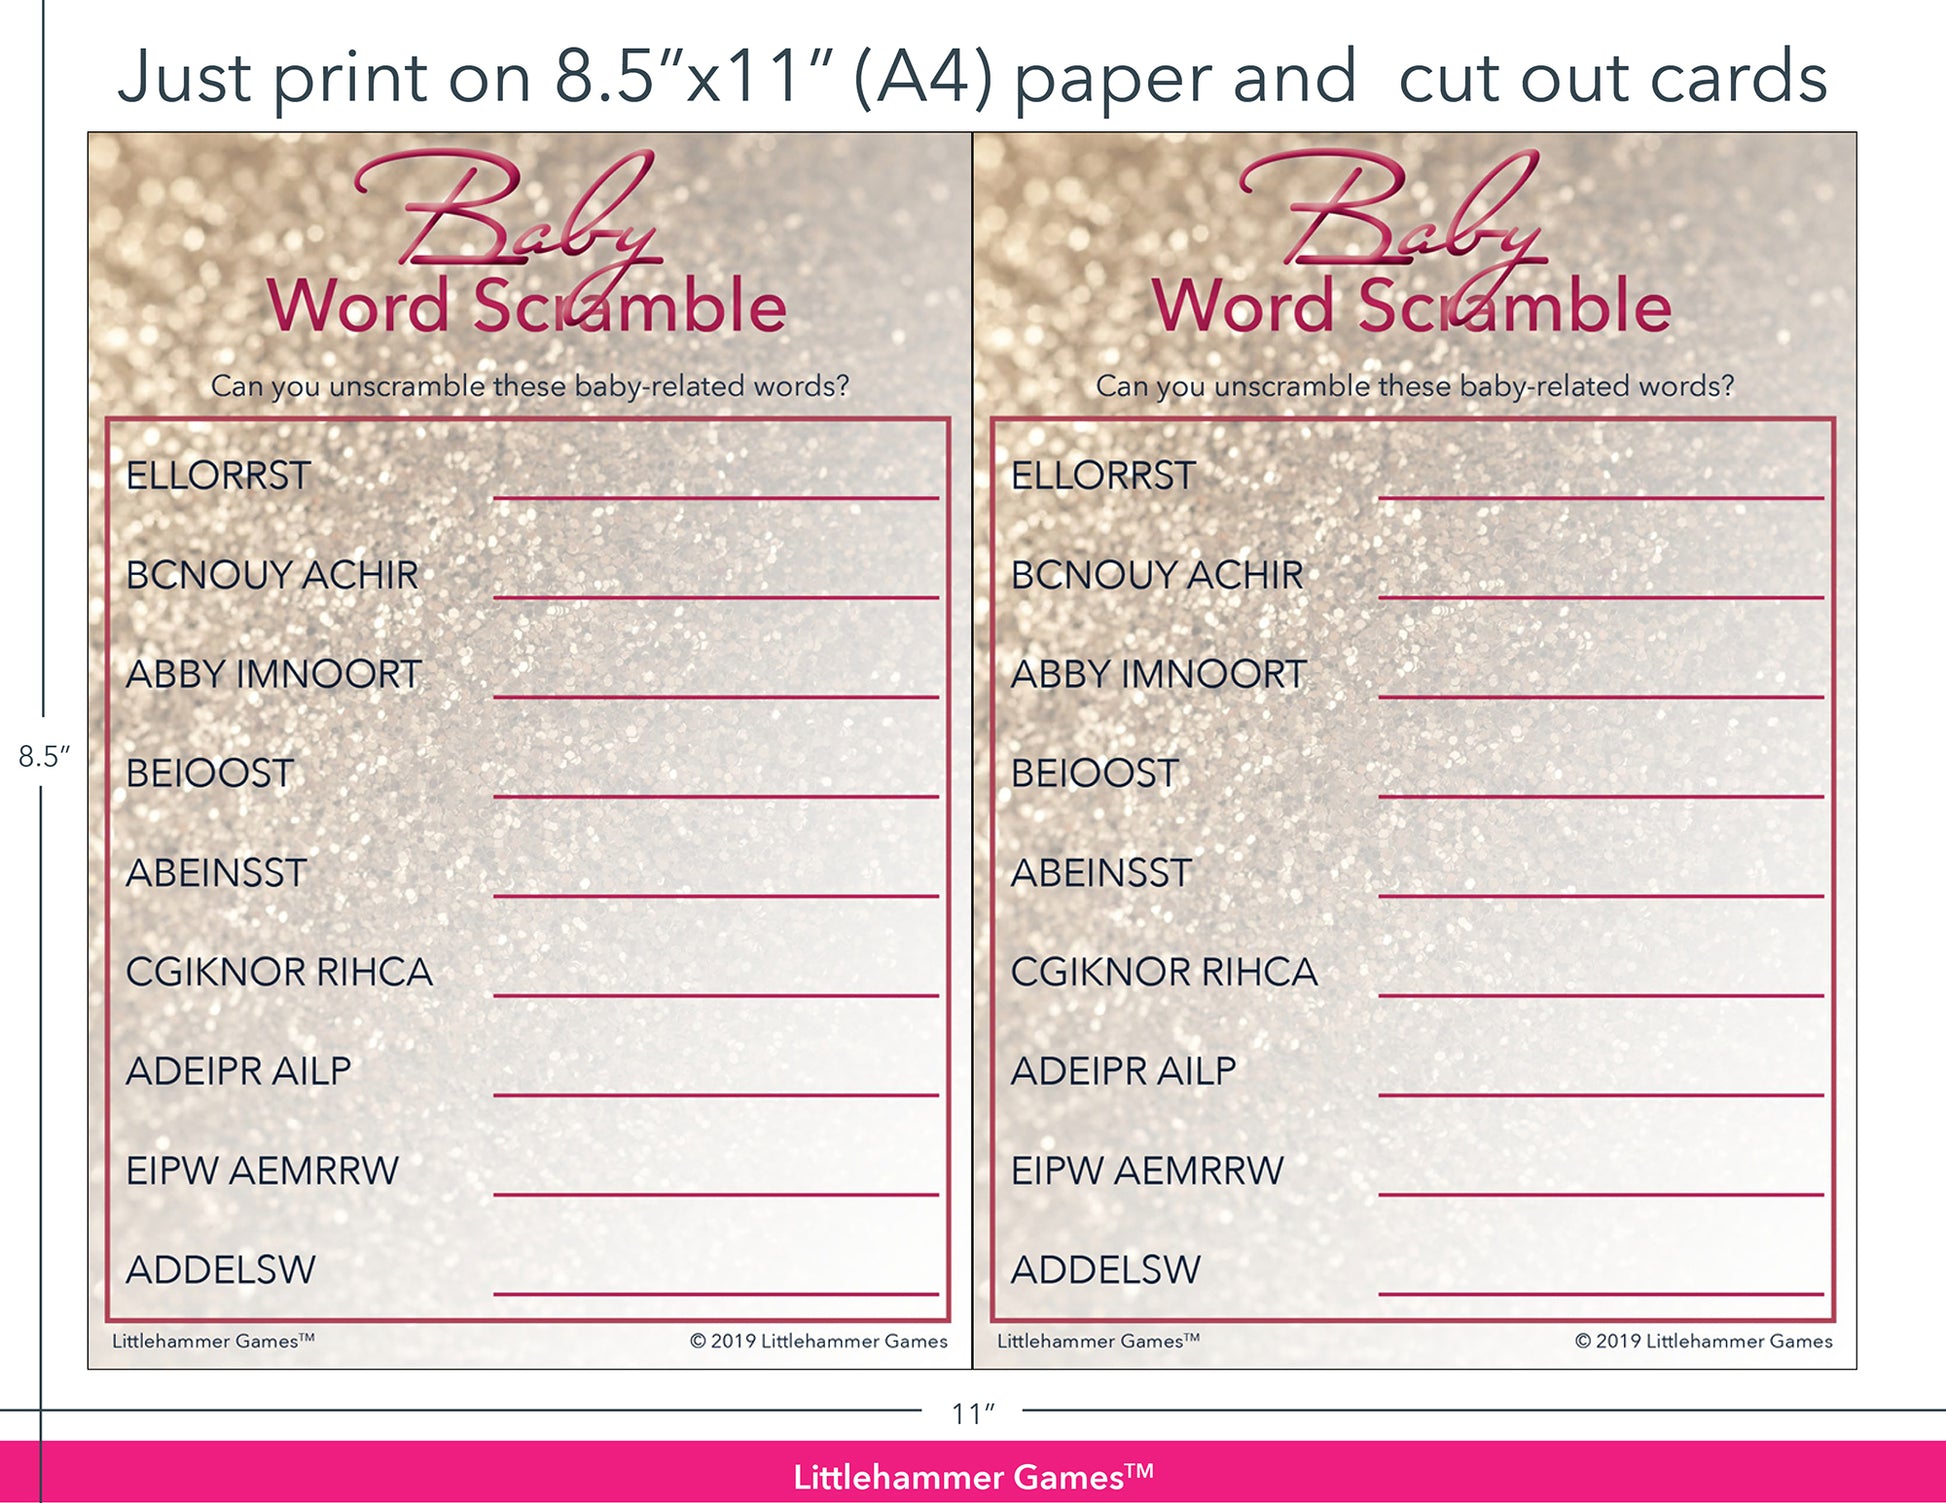 Baby Word Scramble glittery rose gold game cards with printing instructions